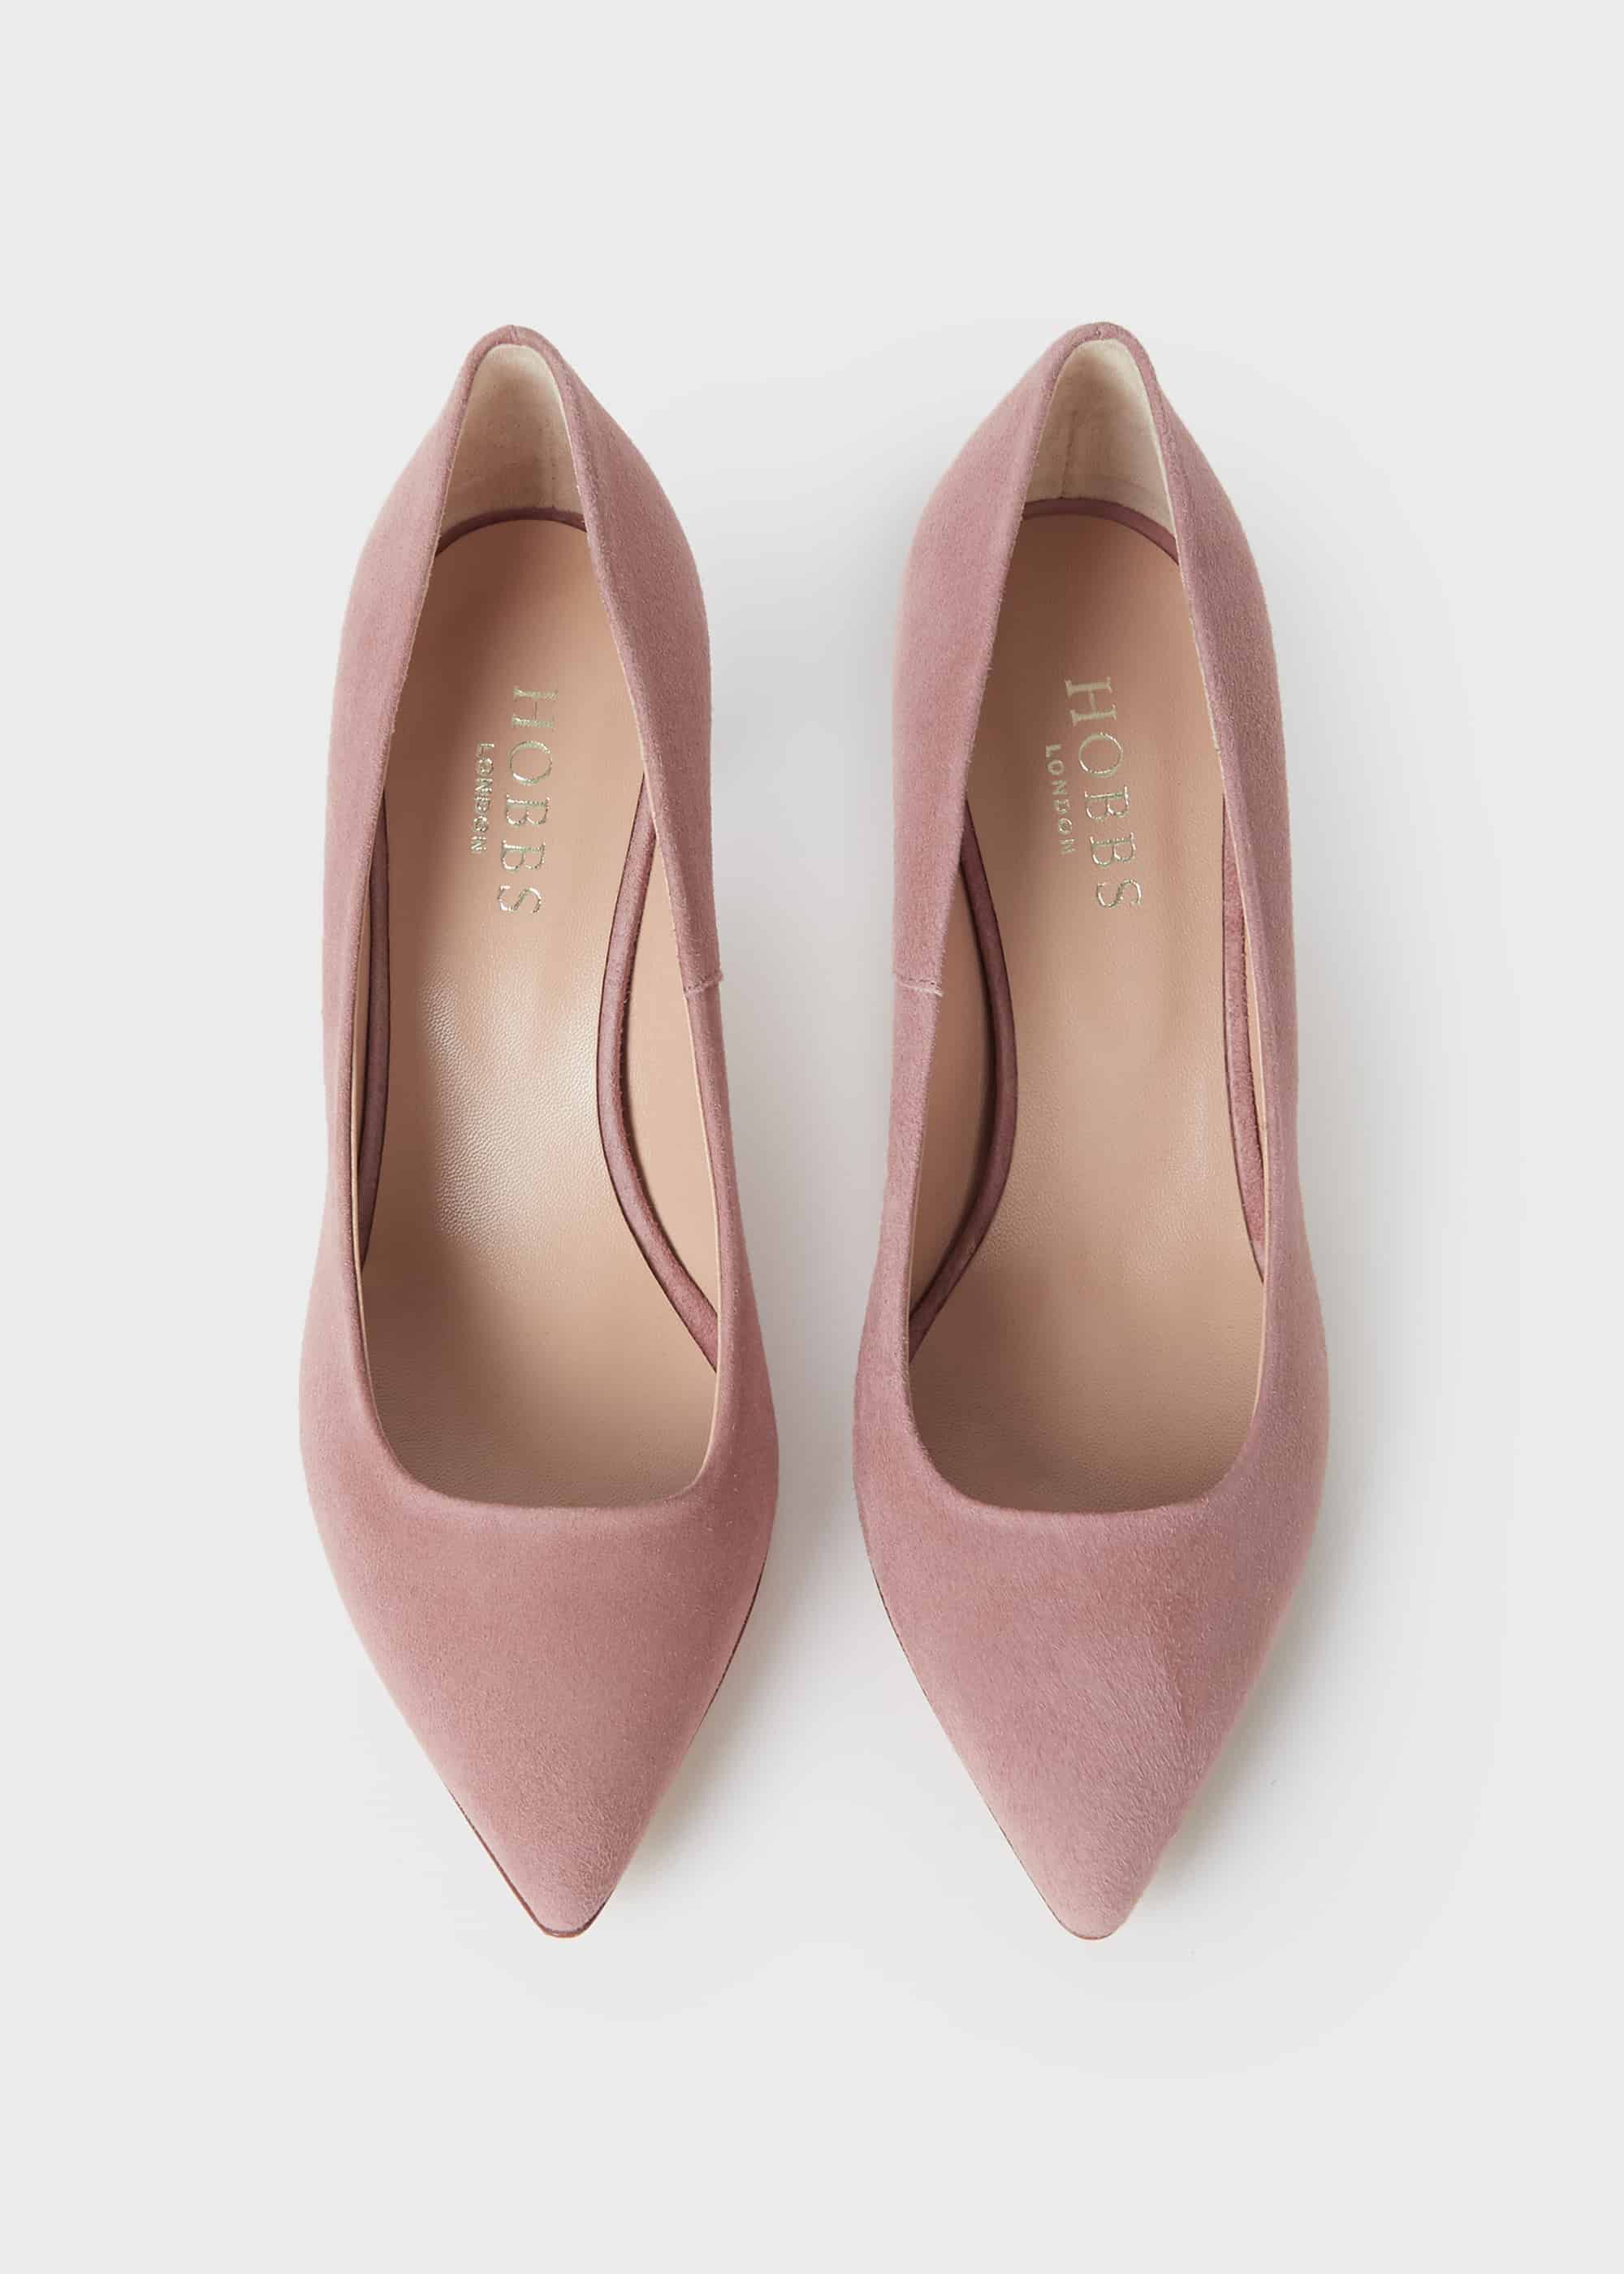 dusty pink court shoes